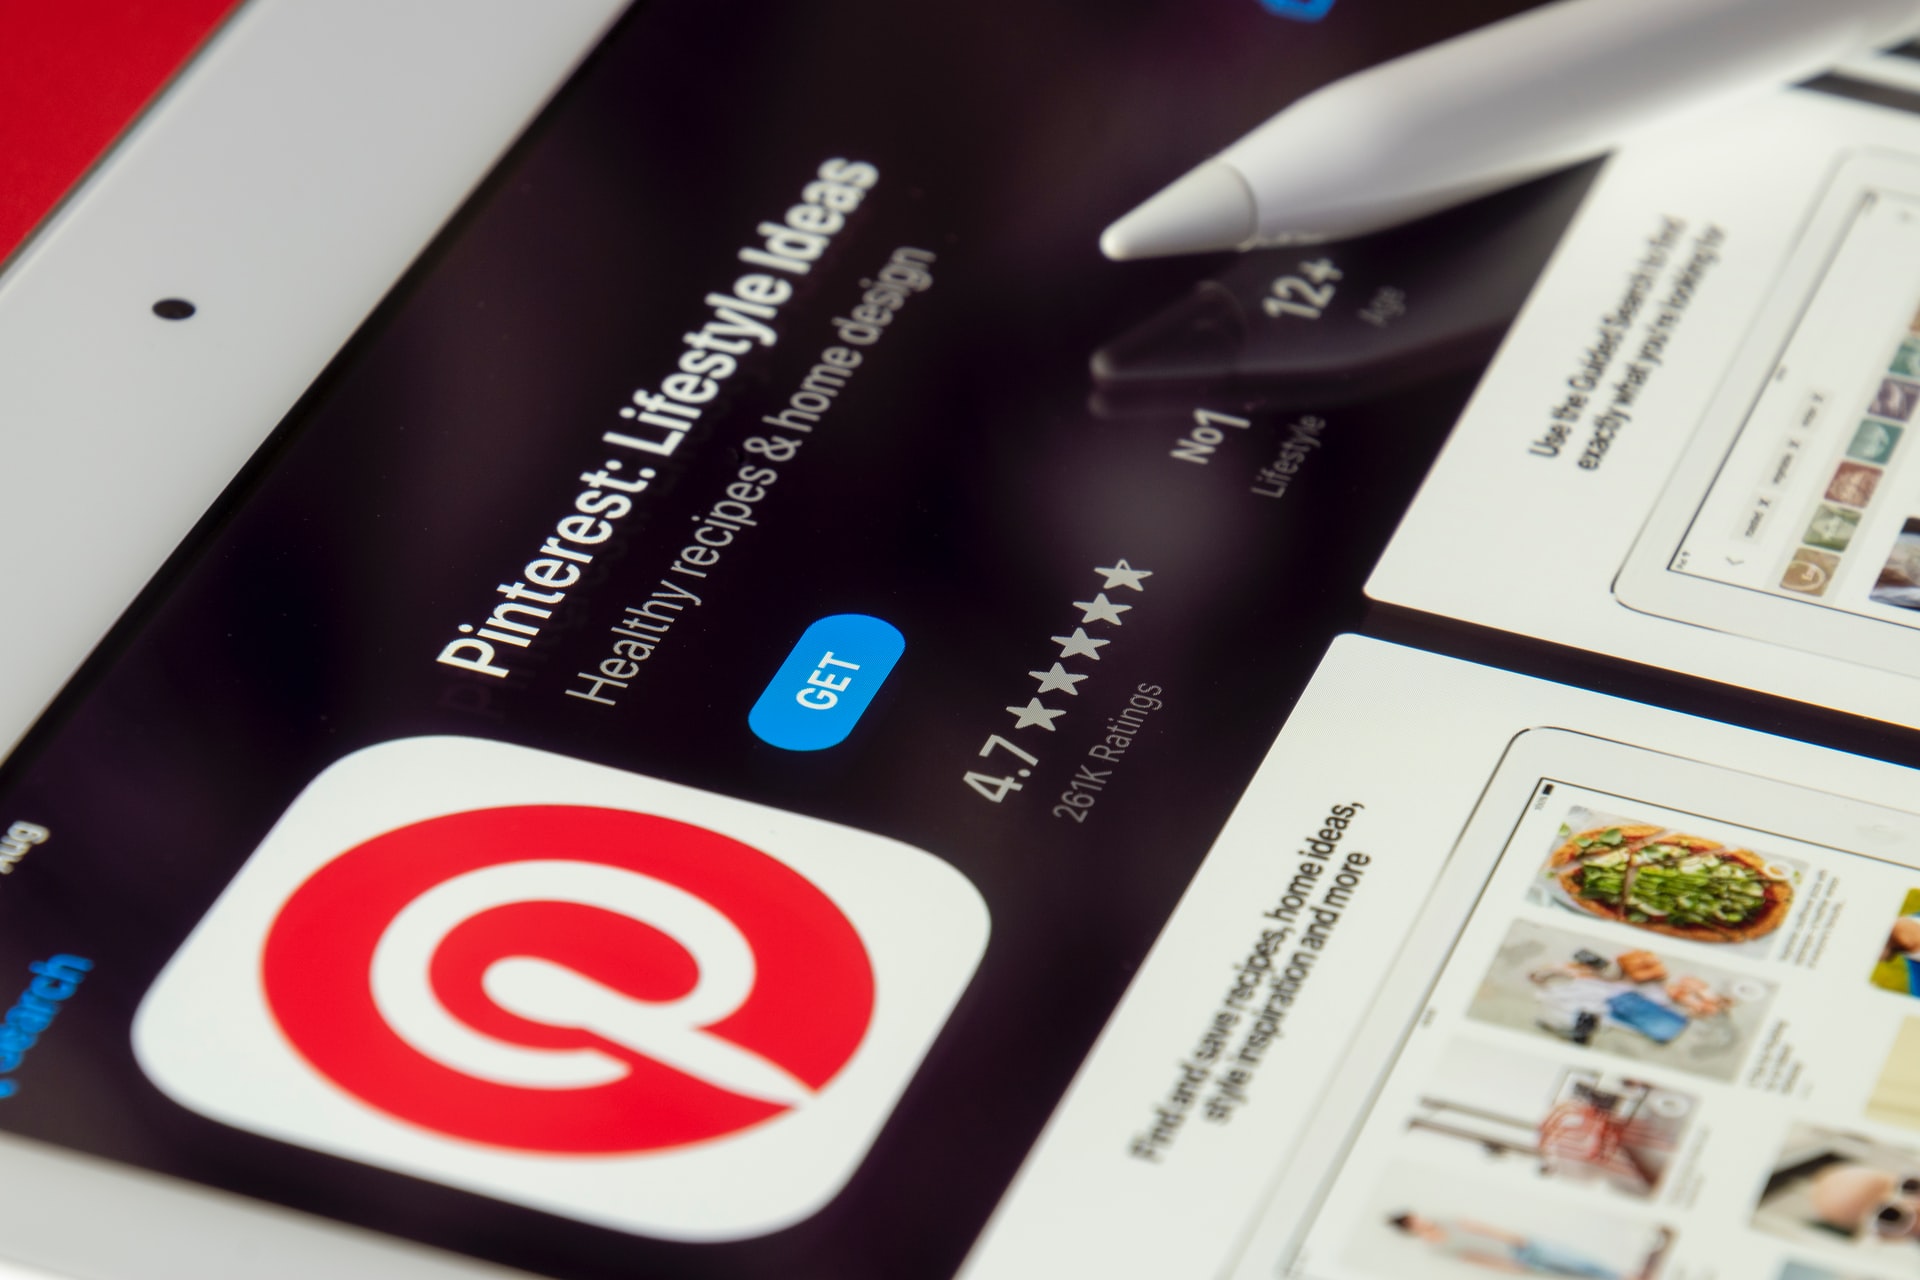 How to Make Sure You're Using Best Pinterest Categories for Your Brand